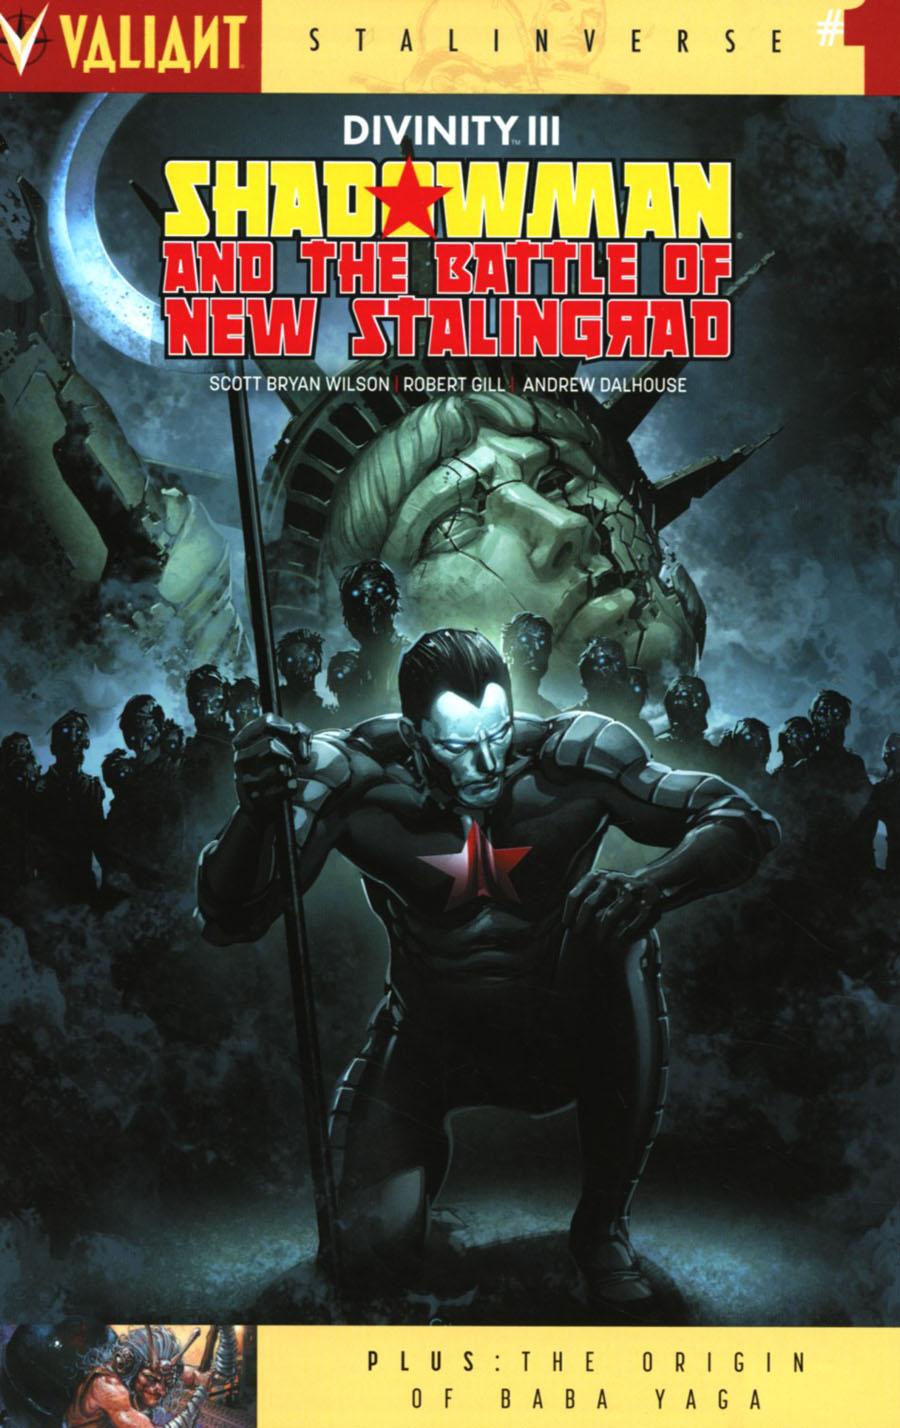 Divinity III Shadowman And The Battle Of New Stalingrad Vol. 1 #1